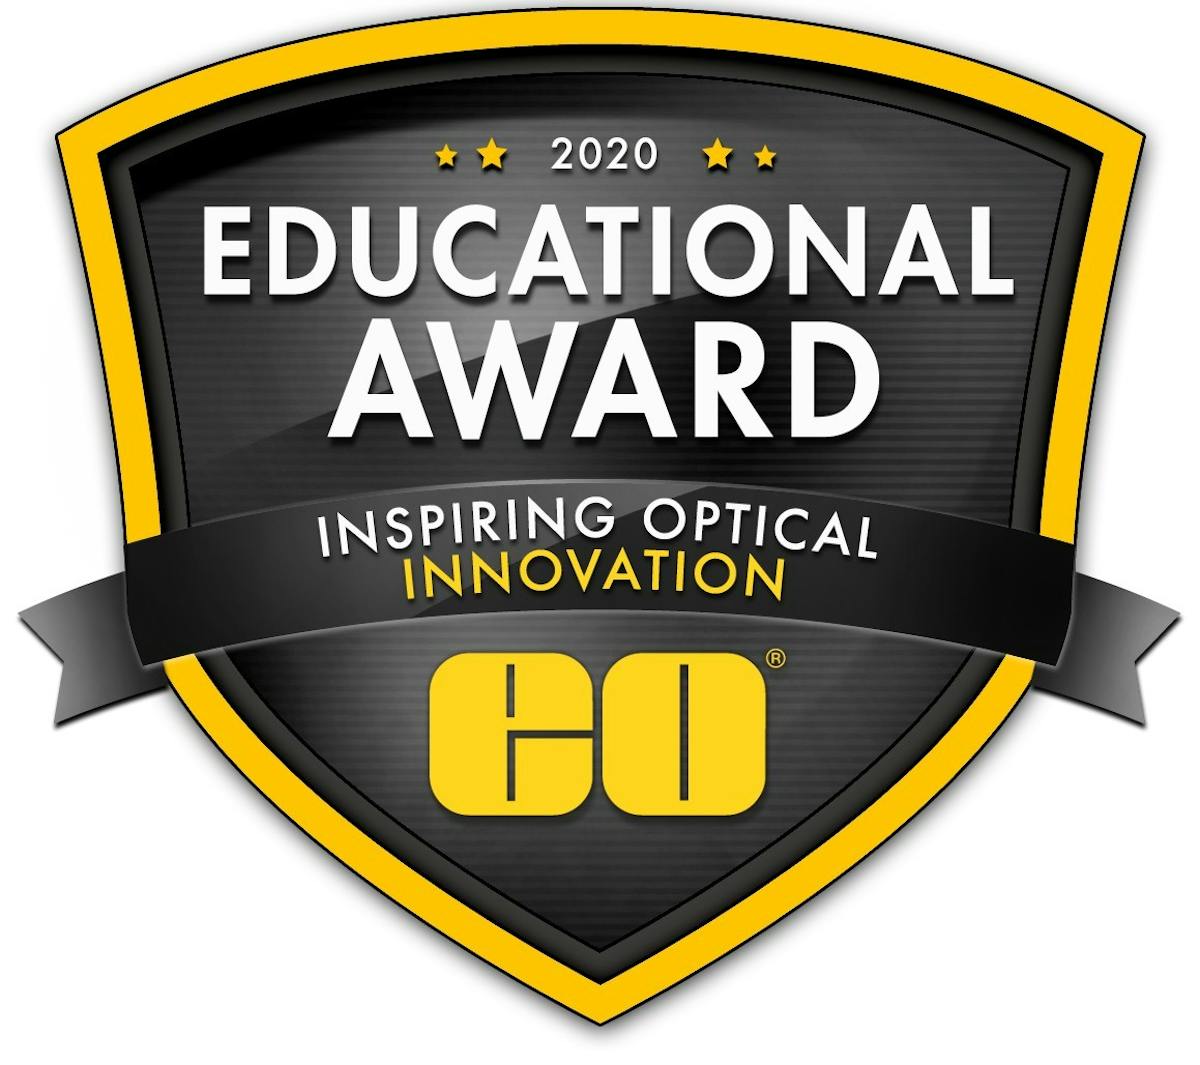 The Edmund Optics Educational Award is an initiative to support outstanding undergraduate and graduate optics programs in science, technology, engineering, and mathematics at non-profit colleges and universities.